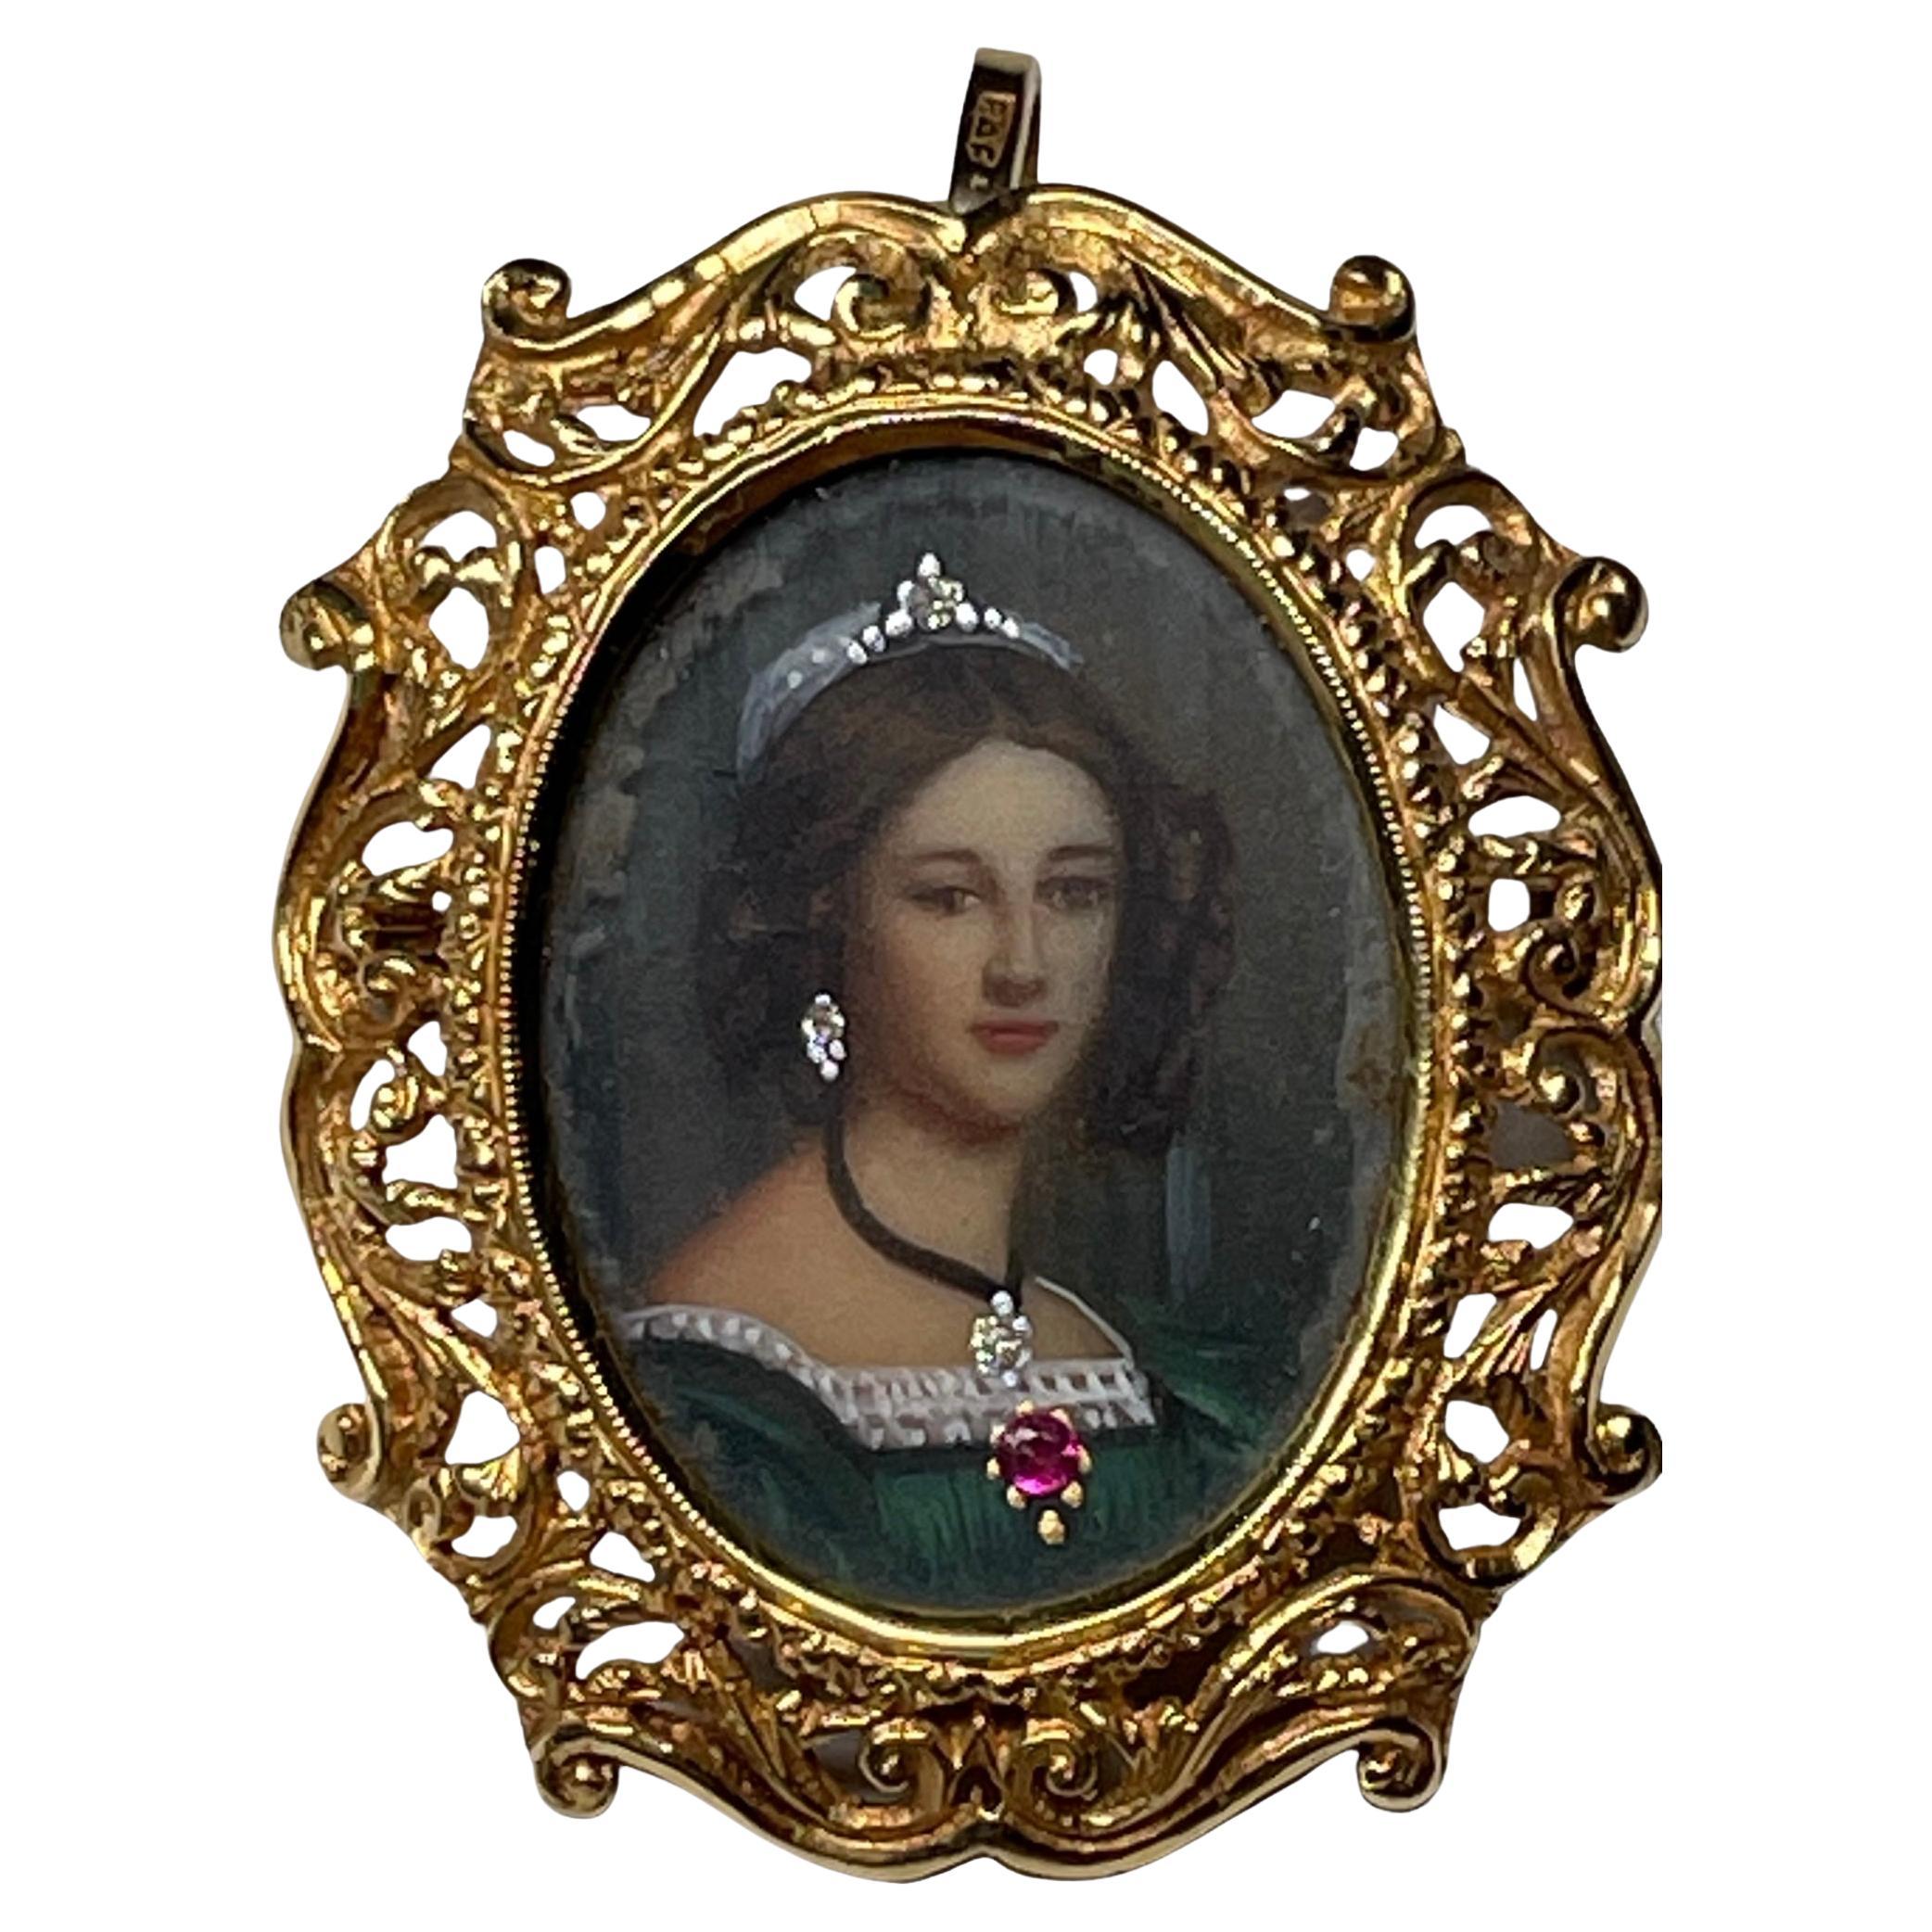 This is an Italian 18K yellow gold portrait pendant/brooch. It depicts an oval shaped brooch/pendant with a hand painted miniature oil painting of an 18th century young lady wearing a small crown, earring and pendant enhanced by tiny diamonds (